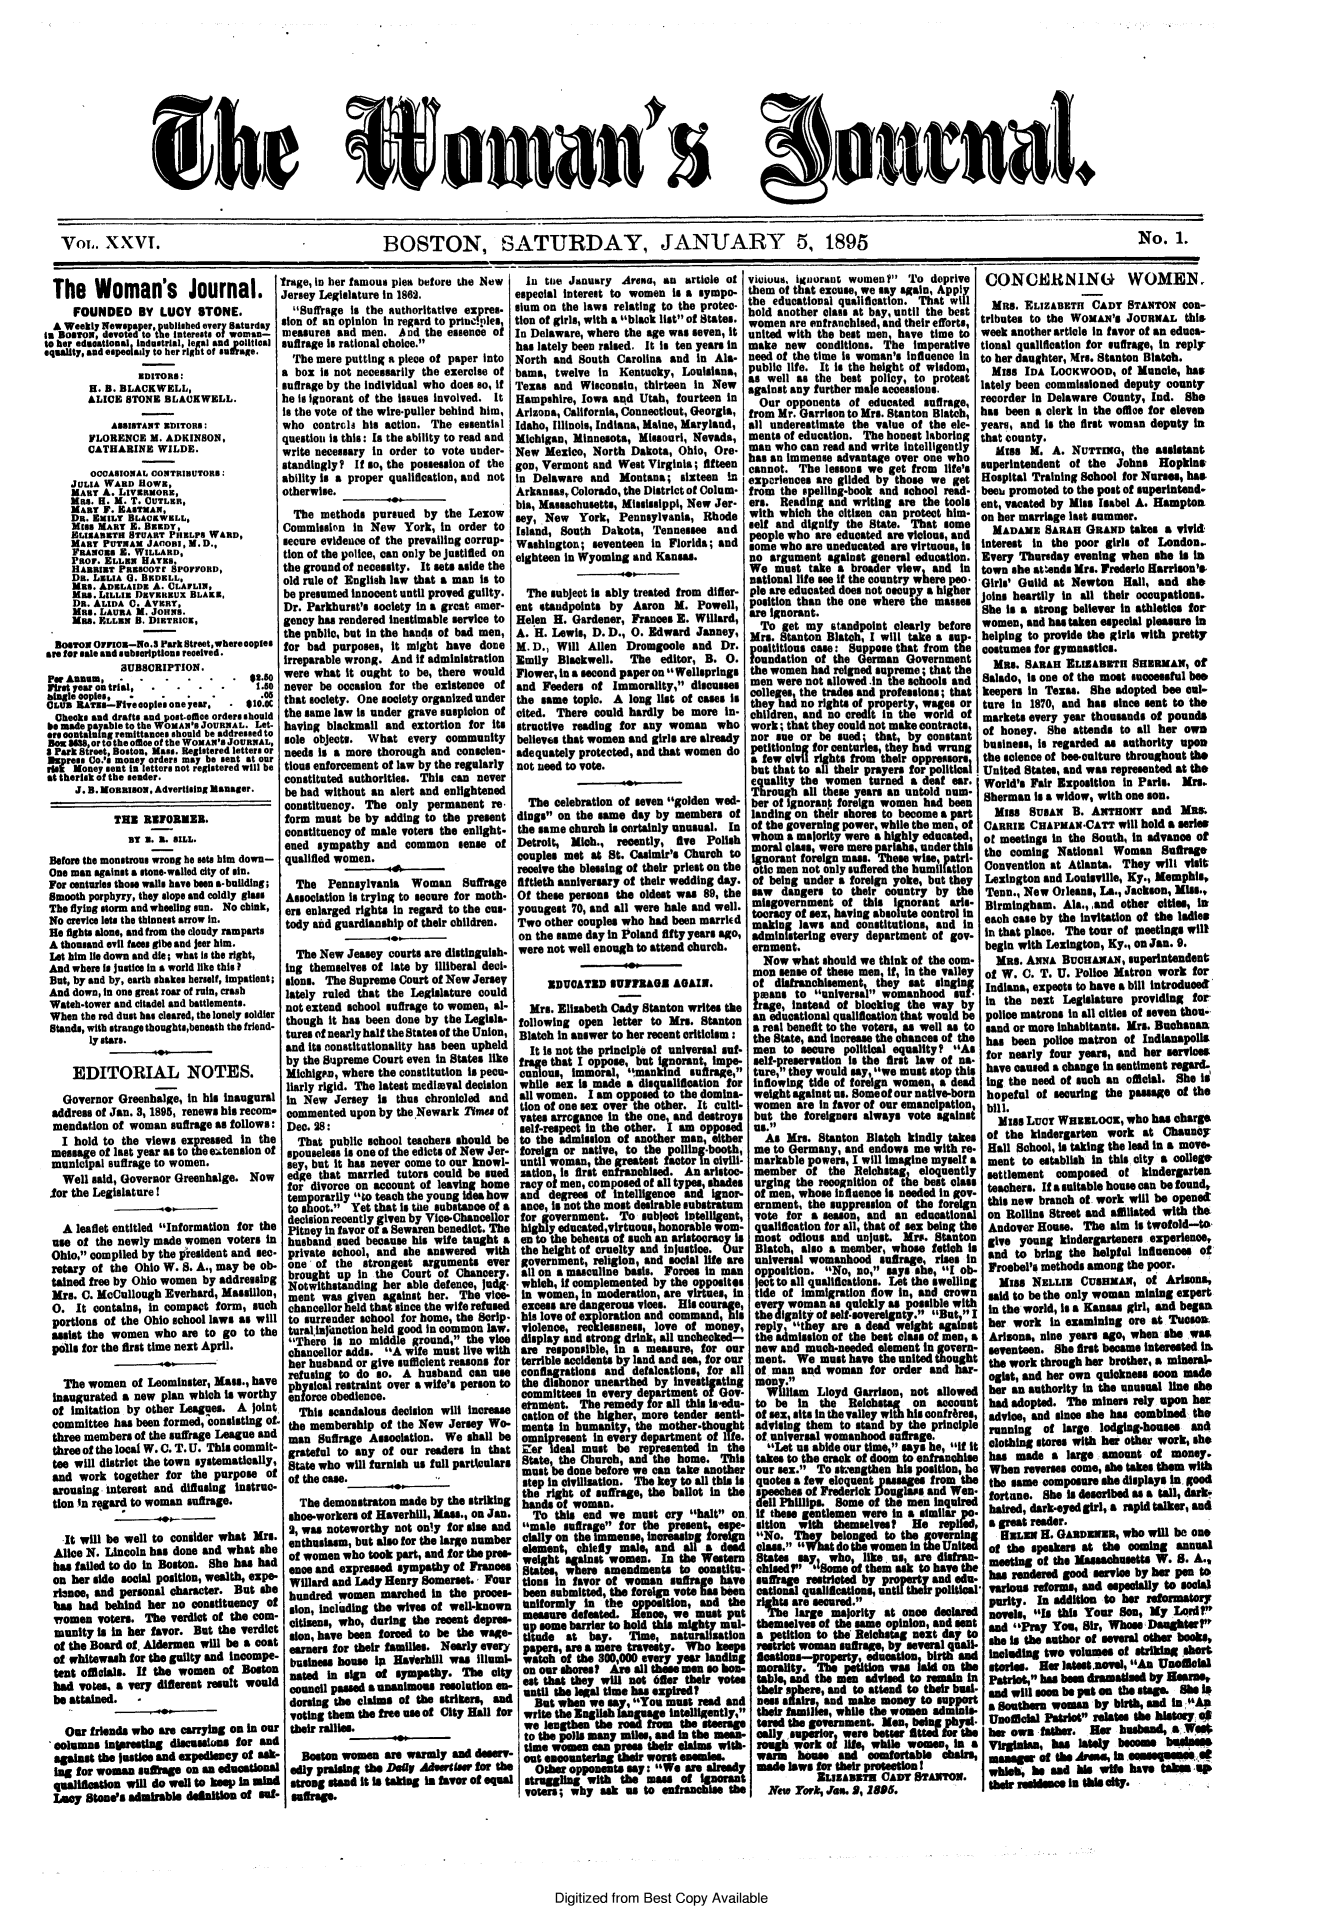 handle is hein.journals/wmjrnl26 and id is 1 raw text is: 











She


VOL. XXVI.                                              BOSTON, SATURDAY, JANUARY 5, 1895


  The Woman's Journal.
     FOUNDED BY LUCY STONE.
  A Weekly NVewsper, published ever Saturday
in RsOer,        . evoted to the Interests o woman-
to her edeastionl, industrial, legal and political
equality, and espeolally to her right of s!&ae.
                EDITORS:
        H. B. BLACKWELL,
        ALICE STONE BLACKWELL.

            ASSISTANT EDITORS:
        FLORENCE M. ADKINSON,
        CATHARINE WILDE.
        OoOASIONAL CONTRIBUTOR:
     JULIA WARD OWE,
     MARY A. LIVERMORE,
     Mae. H. M. T. CUTLER,
     MART Y . EASTMAN,
     DR. EMILY BLAKWELL
     MISS MARY E.. BREDY,
     BLIeAeTH STUART PHELPS WARD,
     MART PUTNAM JAOOI, M.D.,
     FRAN ES  . WILLARD,
     PRO. ZLLEN HAYS.
     HARRIET PRESCOTr SPOFFORD
     DR. LELIA 0. BKDXLL,
     MRS. ADELAIDE A. CLAFLIN,
     MR&. LILLIE DEVEknUX BLAKE,
     DR. ALIDA C. AVERY,
     MRS. LAURA M. JOHNS.
     MRS. ELLER B. DIETRICK,
  BOaToN OriO-No.S Park Streetwhere copies
are for sale and subscriptions received.
             SUBSCRIPTION.
 P  Annum..........-         . ..
 First year ontrial.........1,
 bingle copies,  .   .   .   .        .0
 OLUE RATis--FIve eopies one year, 4110.0c
 Checks and drafts and post.offioe orders should
 be made payable to the WOMAN's JOURNAL. Let.
 or containing remittances should be addressed to
 Bo 8,or to the 0e106eo the WOMAN'S JOURNAL,
 I Park Street, Boston. Mass. Registered letters or
 DMnress Co.'s money orders may be sent at our
 risk Money sent in letters not registered will be
 at ther1sk of the sender.
     J. B. MoRRIsON, Advertising Manager.

            THE RU2  OEME.
               BY 1. 5. SILL.
 Before the monstrous wrong he sets him down-
 One man against a stone-walled city of sin.
 For centuries those walls have been a.building;
 Smooth porphyry, they slope and coldly glass
 The flying storm and wheeling sun. No chink,
 No crevice Its the thinnest arrow in.
 He fights alone, and from the cloudy ramparts
 A thousand evil faces gibe and jeer him.
 Let him lie down and die; what is the right,
 And where Is justice in a world like this?
 But, by and by, earth shakes herself, Impatient;
 And down, in one great roar of ruin, crash
 Watch-tower and citadel and battlements.
 When the red dust has cleared, the lonely soldier
 Stands, with strange thoughts,beneath the friend-
        ly stars.

     EDITORIAL NOTES.

   Governor Greenhalge, in his inaugural
 address of Jan. 3, 1895, renews his recom-
 mendation of woman suffrage as follows:
   I hold to the views expressed In the
 message of last year as to the extension of
 municipal suffrage to women.
   Well said, Governor Greenhalge. Now
 or the Legislature !

   A leaflet entitled Information for the
 use of the newly made women voters in
 Ohio, compiled by the president and sec-
 retary of the Ohio W. S. A., may be ob-
 tained free by Ohio women by addressing
 Mrs. C. McCullough Everhard, Massillon,
 0. It contains, in compact form, such
 portions of the Ohio school laws as will
 assist the women who are to go to the
 polls for the first time next April.

   The women of Leominster, Mass., have
 inaugurated a new plan which Is worthy
 of imitation by other Leagues. A joint
 committee has been formed, consisting of
 three members of the suffrage League and
 three of the local W. C. T. U. This commit-
 tee will district the town systematically,
 and work together for the purpose of
 arousing interest and diffusing instruc-
 tion In regard to woman suffrage.

   It will be well to consider what Mrs.
   Alice N. Lincoln has done and what she
   has failed to do in Boston. She has had
   on her side social position, wealth, expe-
   rine, and personal character. But she
   has had behind her no constituency of
   women voters. The verdict of the com-
   munity is in her favor. But the verdict
   of the Board of. Aldermen will be a coat
   of whitewash for the guilty and incompe-
   tent officials. If the women of Baton
   bad vo es, a very different result would
   be attained. -

   Our friends who are carrying on in ou
 columns inirestlng discussions for and
 against the justice and expediency of ask.
 lag for woman sneage on an educatioal
 qulificaton wil do well to keep in mind
 Lucy Stone's admirabi defniin of snf.


Ifrage, In her famous plea before the New
Jersey Legislature in 1862.
   Suffrage is the authoritative expres-
 sion of an opinion in regard to princ.ples,
 measures and men. And the essence of
 suffrage Is rational choice.
   The mere putting a piece of paper Into
 a box is not necessarily the exercise of
 suffrage by the individual who does so, if
 he is ignorant of the issues involved. It
 is the vote of the wire-puller behind him,
 who controls his action. The essential
 question is this: Is the ability to read and
 write necessary in order to vote under-
 standingly  If so, the possession of the
 ability Is a proper qualification, and not
 otherwise.
   The methods pursued by the Lexow
 Commission In New York, in order to
 secure evidence of the prevailing corrup-
 tion of the police, can only be justified on
 the ground of necessity. It sets aside the
 old rule of English law that a man is to
 be presumed Innocent until proved guilty.
 Dr. Parkhurst's society in a great emer-
 gency has rendered Inestimable service to
 the public, but in the hands of bad men,
 for bad purposes, it might have done
 Irreparable wrong. And if administration
 were what It ought to be, there would
 never be occasion for the existence of
 that society. One society organized under
 the same law is under grave suspicion of
 having blackmail and extortion for Its
 sole objects. What every community
 needs Is a more thorough and conscien-
 tious enforcement of law by the regularly
 constituted authorities. This can never
 be had without an alert and enlightened
 constituency. The only permanent re-
 form must be by adding to the present
 constituency of male voters the enlight-
 ened sympathy and common sense of
 qualified women.

   The Pennsylvania Woman Suffrage
 Association is trying to secure for moth-
 ers enlarged rights In regard to the cus-
 tody and guardianship of their children.

   The New Jeasey courts are distinguish-
 ing themselves of late by illiberal deci-
 sions. The Supreme Court of New Jersey
 lately ruled that the Legislature could
 not extend school suffrage to women, al-
 though it has been done by the Legisla-
 tures of nearly half the States of the Union,
 and its constitutionality has been upheld
 by the Supreme Court even in States like
 MichigAn, where the constitution is pecu-
 liarly rigid. The latest medieval decision
 in New Jersey Is thus chronicled and
 commented upon by the Newark 2mes of
 Dec. 28:
    That public school teachers should be
  spouseless is one of the edicts of New Jer-
  sey, but it has never come to our knowl-
  edge that married tutors could be sued
  for divorce on account of leaving home
  temporarily to teach the young idea how
  to shoot. Yet that Is the substance ofa
  decision recently given by Vice-Chancellor
  Pitney in favor o a Sewaren benedict. The
  husband sued because his wife taught a
  private school, and she answered with
  one of the strongest arguments ever
  brought up in the Court of Chancery.
  Notwithstanding her able defence, Judg.
  ment was given against her. The vice-
  chancellor held that since the wife refused
  to surrender school for home, the Scrip.
  turallnjinction held good In common law.
  There is no middle ground, the vice
  chancellor adds. A wife must live with
  her husband or give sufficient reasons for
  refusing to do so. A husband can use
  physical restraint over a wife's persn to
  enforce obedience.
  This scandalous decision will Increase
  the membership of the New Jersey Wo-
  man Suffrage Association. We shall be
  grateful to any of our readers in that
  State who will furish us fall partculears
  of the case.

    The demonstraton made by the striking
  shoe-workers of Haverhill, Mass., on Jan.
  2, was noteworthy not ony for size and
  enthusiasm, but also for the irg number
  of women who took part, and for the pres-
  ence and expressed sympathy of Frances
  Wlard and Lady Henry Somerset. Four
  hundred women marched in the proes-
  sion, including the wives of well-known
  citiens, who, during the recent depres-
  lion, have been forced to be the wage-
  eaners for their amille. Nearly every
  business    hoeIa Haerbhl was Illumi-
  nated in lign of Sympathy. The city
  council pased a unanimous resolution en-
  doring the claims of the strikers, and
  voting them the free use of City Hall for
r their rallies.
I                    -
Boston wome        are warmly and deserv-
I edy prasing the Defv Adurlser for the
I strong stad it is taking in favor of equal
sumffrage


  In tne January Arena, an article of
especial interest to women is a sympo-
sium on the laws relating to the protec-
tion of girls, with a black list of States.
In Delaware, where the age was seven, It
has lately been raised. It is ten years in
North and South Carolina and in Ala-
hams, twelve in   Kentucky, Louisiana,
Texas and Wisconsin, thirteen in New
Hampshire, Iowa and Utah, fourteen in
Arizona, California, Connecticut, Georgia,
Idaho, Illinois, Indiana, Maine, Maryland,
Michigan, Minnesota, Missouri, Nevada,
New Mexico, North Dakota, Ohio, Ore-
gon, Vermont and West Virginia; fifteen
in Delaware and Montana; sixteen In
Arkansas, Colorado, the District of Colum- f
bia, Massachusetts, Mississippi, New Jer-
sey, New York, Pennsylvania, Rhode
Island, South Dakota, Tennessee and
Washington; seventeen In Florida; and
eighteen in Wyoming and Kansas.
                  Sol~
  The subject is ably treated from differ-
ent standpoints by Aaron M. Powell,
Helen H. Gardener, Frances E. Willard,
A. H. Lewis, D. D., 0. Edward Janney,
M.D., Will Allen Dromgoole and Dr.
Emily Blackwell.    The editor, B. 0.
Flower, in a second paper on Welisprings
and Feeders of Immorality, discusses
the same topic. A long list of cases is
cited. There could hardly be more in-
structive reading for any woman who
believes that women and girls are already
adequately protected, and that women do
not need to vote.

  The celebration of seven golden wed-
dings on the same day by members of
the same church is certainly unusual. In
Detroit, Mich., recently, fve Polish
couples met at St. Casimir's Church to
receive the blessing of their priest on the
fiftieth anniversary of their wedding day.
Of these persons the oldest was 89, the
youngest 70, and all were hale and well.
Two other couples who had been married
on the same day in Poland fifty years ago,
were not well enough to attend church.
                   000
      IDUCATED IUIVI6I&AGA IN.

   Mrs. Elizabeth Cady Stanton writes the
 following open letter to Mrs. Stanton
 Blatch in answer to her recent criticism:
   It is not the principle of universal suf-
 frage that I oppose, but ignorant Impe.
 cun-lous, Immoral, mankind surae,
 while sex i made a disqualification for
 all women. I am opposed to the domina-
 tion of one sex over the other. It culti-
 vates arrogance in the one, and destroys
 self-respect in the other. I am opposed
 to the admission of another man, either
 foreign or native, to the polling-booth,
 until woman, the greatest factor in civill-
 sation Is first enfranchised. An aristoc-
 racyoi men, composed of all types, shades
 and degrees of Intelligence and ignor-
 ance, Is not the most desirable substratum
 for government. To subject lntelligent,
 high y educated,virtuous, honorable wom-
 en to the behests of such an aristocracy Is
 the height of cruelty and Injustice. Our
 government, religion, and social life are
 all on a masculine basis. Forces in man
 which, If complemented by the opposites
 in women, in moderation, are virtues, in
 excess are dangerous vices. His courage,
 his love of exploration and command, his
 violence, recklessness, love of money,
 display and strong drink, all unchecked-
 are responsible, in a measure, for our
 terrible accidents by land and sea, for our
 conflagrations and defaloations, for all
 the dishonor unearthed by Investigating
 committees in every department of Gov-
 etnnnt. The remedy for all this isedu-
 cation of the higher, more tender senti-
 ments In humanity, the mother-thought
 omnipresent in every department of life.
 Zer Ideal must be represented in the
 State, the Church, and the home. This
 must be done before we can take another
 step in civilization. The key to all this is
 the right of suffrage, the ballot in the
 hands of woman.
   To this end we must cry halt on.
 male suffrage for the present, ope-
 cally on the immense, inerasin foreign
 element, chiefly male, and al a dead
 weight against women. In the W     tern
 States, where amendments to constitu-
 tions in favor of woman suffr e have
 been submitted, the foreign vote has been
 Uniformly in the oppoltion, and the
 measure defeated. Hose we must put
 up some brrier to hold this mighty maul-
 titude at bay. Time, naturalization
 pape, are a mere travesty. Who keep
 watch of the 800,000 every year landing
 onourshore   Areallthesemensobon-
 eat that they will not 61er their veto
 until the legal time has expired?
   But when we say, You most red and
   writ the nglish language intelligently,
   we iengten te road from the steerage
 to the pois maiy miles,ad in the mean-
 timewomen canprese their claimswith-
 out enountergl their worst eneies .
 Other opponent say: We aer alreay
 s truggin   with the massof Igorn
 voters; why ask u to enrncie the


vicious, iguorant women? To deprive
them of that excuse, we say again, Apply
the educational qualification. That will
hold another class at bay, until the best
women are enfranchised, and their efforts,
united with the best men, have time to
make new    conditions. The imperative
need of the time is woman's influence In
public life. It Is the height of wisdom,
as well as the best policy, to protest
against any further male accessions.
  Our opponents of educated suffrage,
from Mr. Garrison to Mrs. Stanton Blatch, I
all underestimate the value of the ele-
ments of education. The honest laboring
man who can read and write intelligently
has an immense advantage over one who
cannot. The lessons we get from life's
experiences are gilded by those we get
from the spelling-book and school read-
ers. Reading and writing are the tools
with which the citisen can protect him-
self and dignify the State. That some
people who are educated are vieious, and
some who are uneducated are virtuous, Is
no argument against general education.
We must take a broader view     and in
national life see if the country where peo.
pie are educated does not oscupy a higher
position than the one where the masses
are Ignorant.
  To get my standpoint clearly before
Mrs. Stanton Blatoh, I will take a sup-
p osititious CAse: Suppose that from the
foundation of the German Government
the women had reigned supreme; that the
men were not allowed in the schools and
colleges the trades and professions; that I
they ha no rights of property, wages or
children, and no credit in the world of
work; that they could not make contracts,
nor sue or be sued - that, by oonstant
petitioning for centuries, they had wrung
a few civil rights from their oppressors
but that to all their prayers for political
equality the women turned a deaf ear.
Through all these years an untold num-
ber of ignorant foreign women had been
landing on their shores to become a part
of the governing power, while the men, of
whom a majority were a highly educated,
moral clsse, were mere pariahs, under this
ignorant foreign mass. These wise, patri-
otic men not only suffered the humiliation
of being under a foreign yoke, but they
saw dangers to their country by the
misgovernment of this Ignorant aris-
tocracy of sex, having absolute control in
making laws and constitutions, and In
adminis1trng every department of gov-
ernment.
  Now what should we think of the com-
  mon sense of these men, It, In the valley
  of disfranchisement, they set sluging
  pmans to universal womanhood sf.
  frage, instead of blocking the way by
  an educational qualification that would be
  a real benefit to the voters, as well as to
  the State, and Increase the chances of the
  men to secure political equality? As
  self-preservation Is the first law of na.
  ture, they would say, we must stop this
  inflowing tide of foreign women, a dead
  weight anst us. Someof our native-born
  women are in favor of our emancipation,
  but the foreigners always vote against
  Us.
  As Mrs. Stanton Blatch kindly takes
  me to Germany, and endows me with re-
  markable powers, I will imagine myself a
  member of the Relchatag, eloquently
  urging the recognition of the best class
  of men, whose Influence Is needed in gov-
  ernment, the suppression of the foreign
  vote for a season, and an educational
  qualification for all, that of sex being the
  most odious and unjust. Mrs. Stanton
  Blatch, also a member, whose fetish is
  universal womanhood suffrage, rises in
  opposition. No, no, says she, I ob-
  ject to all qualifications. Let the swelling
  tide of immigration flow In, and crown
  every woman as quickly as possible with
  the dignity of self-sovereignty. But, I
  reply they are a dead weightagaist
  the admission of the best cala  of men, a
  new and much-needed element In govern-
  ment. We must have the united thought
  of man and woman for order and har-
  mony.
  Wliam Lloyd Garrison, not allowed
  to be in the Reichstag on account
  of sex, sits In the valley with his confrAres,
  advising them to stand by the principle
  of universal womanhood suffrge.
  Let us abide our time, says he, if it
  takes to the crack of doom to enfranchise
  our sex., To sirengthen his position, he
  quotes a few eloquentpassages from the
  apeechex of Frederik Douglas and Wn.
  dell PhilWips ome of the men inquired
  if these gentlemen were in a similar p-
  ition with themselves? He replied,
  No. They belonged to the gverning
  clas. What do the women in theUnited
  States say, who, like us, aredisfran-
  chised? Some of them ask to have the
  suffrage restricted by propryand edu-
  cation qualificatons, untl their political
  rig   re secured.
  The large majority at once declared
  themselves of the same opinion, anda nt
  a petition to the Relchatag next day to
  restrict woman sutrage, y severml qu&
  fication-property, educatlon birthA
  morality. Th   peitin was I on the
  table, and the men advised to remai in
  their sphere, and to attend to their bad-
  no affairand make money to support
  their families, while the women adminis-
  tered the government. Men, beingphysi-
  cally superior, were betier fitted fo.h
               croforhe
 rough work Of l~i~fe whlew   , in a
 warm   house and comfortabis cars,
 made laWs for their proteton !
            NUZABETE CAnM STANTO.
   New York, Jis. 9, 1895


                           No. 1.


 CONCERNIN               WOMEN.
 MRS. ELIZABETH CADY STANTON COn-
tributes to the WOMAN'S JOURNAL this
week another article In favor of an educa-
tional qualification for suffrage, in reply
to her daughter, Mrs. Stanton Batch.
  Miss IDA LOCKWOOD, of Muncie, has
lately been commissioned deputy county
recorder in Delaware County, Ind. She
has been a clerk in the office for eleven
years, and is the first woman deputy in
that county.
  Urts M. A. NUTTING, the assistant
superintendent of the Johns Hopkins
Hospital Training School for Nures, has
boet promoted to the post of superintend-
ent, vacated by Miss Isabel A. Hampton
on her marriage last summer.
  MADAME SARAH GRAND takes a vivid
interest in the poor girls of London.
Every Thursday evening when she is in
town she attends Mrs. Frederic Harrison's
Girls' Guild at Newton Hall, and she
joins heartily in all their occupations.
She is a strong believer in athletics for
women, and hastaken especial pleasure in
helping to provide the girls with pretty
costumes for gymnastics.
  MRs. SARAH ELIZBRTU SHERMAN, Of
Salado, is one of the most successful bee
keepers In Texas. She adopted bee cul-
ture in 1870, and has since sent to the
markets every year thousands of pounds
of honey. She attends to all her own
business, is regarded as authority upon
the science of bee-culture throughout the
United States, and was represented at the
World's Fair Exposition in Paris. Mrs.
Sherman Is a widow, with one son.
  Miss SUSAN B. ANTHONY and MR&
CARRIE CHAPMAN-CATT will hold a series
of meetings in the South, in advance of
the coming National Woman Suffrage
Convention at Atlanta. They will visit
Lexington and Louisville, Ky., Memphis,
Tenn., New Orleans, La., Jackson, MISs.,
Birmingham. Ala., and other lties, in
each case by the invitation of the ladles
in that place. The tour of meetings will
begin with Lexington, Ky., on Jan. 9.
  MRS. AMA BuCHANAN, superintendent
  of W. C. T. U. Pole Matron work for
  Indiana, expects to have a bill Introduced
  in the next Legislature providing for
  polle matrons in all cities of seven thou
  sand or more Inhabitants. Mrs. Buchansa
  has been police matron of Indianapoll,
  for nearly four years, and her servies
  have caused a change in sentiment regard-
  ing the need of such an official. She is
  hopeful of securing the passage of the
  bill.
  Miss LuCY WHEELOCK, who has charge
  of the kindergarten work at Obaun0¥
  Hall School, is taking the lead in a move-
  ment to establish in thiscity a college
  settlement composed of kindergartenL
  teachers. If a suitable house can be found,
  this new branch of work will be opened
  on Rollins Street and affiliated with the
  Andover House. The aim is twofold-to
  give young kindergarteers experience,
  and to bring the helpful Influennces of
  Froebel's methods among the poor.
  Miss NELLIE CUSHMAN, of Arina0n,
  said to be the only woman mining expert
  in the world, Is a Kansas girl, and began
  her work in examining ore at TuoW
  Arizona, nine years ago, when she waS
  seventeen. She first became Interested Ins
  the work through her brother, a mineral-
  ogist, and her own quicknes soon Made
  her an authority in the unusual line She
  had adopted. The miners rely upon ha
  advice, and since she has combined the
  running  of large iodglg-houses an.d
  clothing stores with her other work, she
  has made a large amount Of money.
  When reverses come, she takes them with
  the same composur she displays ingood
  fortune. She is described as a tall, dark,
  haired, dark-eyed girl, a rapid talker, and
  a great reader.
  11LN H. GARDENER, who wil be one
  of the speakers at the coming annual
  meeting of the Masachusett W. S. A.,
  has rendered good service by ber pen to
  various reforms, and espsally to soca
  purity. In addition to her nomtorY
  novels, Is this Your Son, My Lord?
  and Fray You, Sir, Whose Daughter'
  she Is the author of several ot hebooks,
  inluding two volumes of sMin*    t
  stories. Herlatast nove,An Unoffil
  I Patrit, has bm dramatisd by BOOMn
  andwillsmoubeputeon thestage. She l
  a Sfouthern woman by birth, ad inl * !
  Unofficil Paro relate the hitory d
  her own fathar. Her hund,  a West
  irgin, n, ha    atl    ecme um
  Imanage of t  a  , in eseqsa
  ]whieb heusad his we hve tinup
  ]thair resiace in tis city.


Digitized from Best Copy Available


                                    %t 12

ifamon,64


